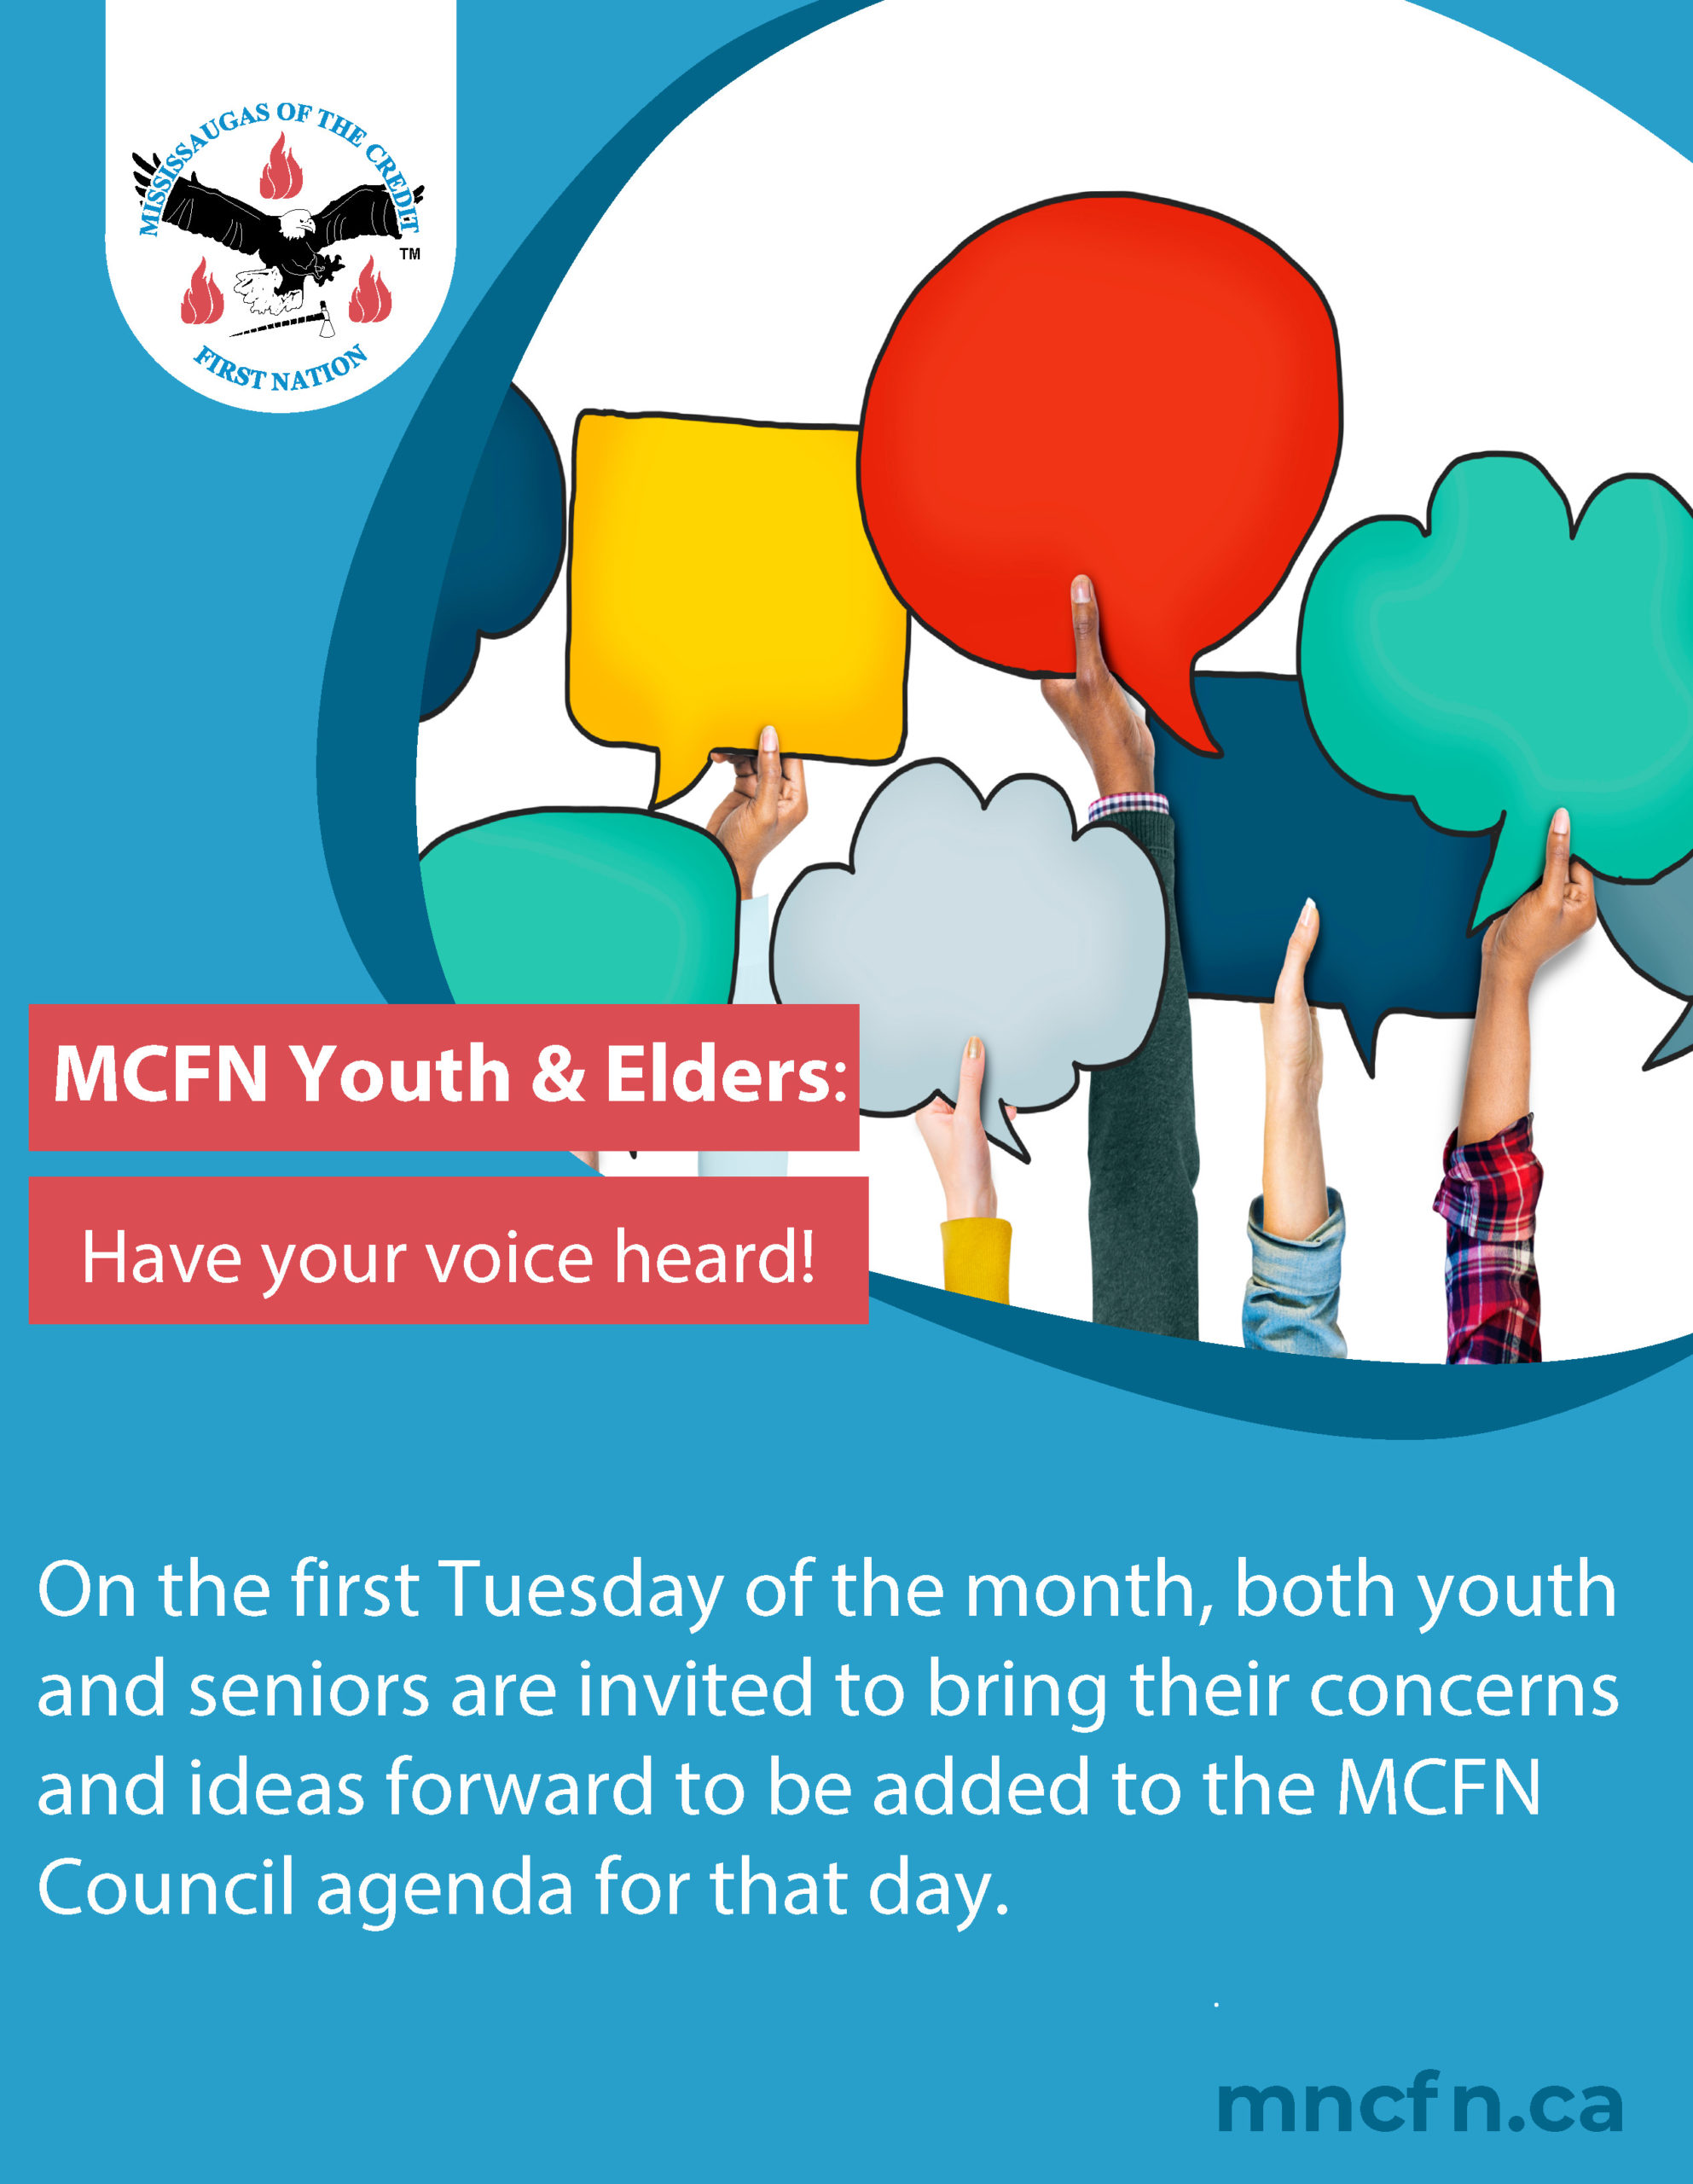 MCFN Youth and Elders invited to speak at council